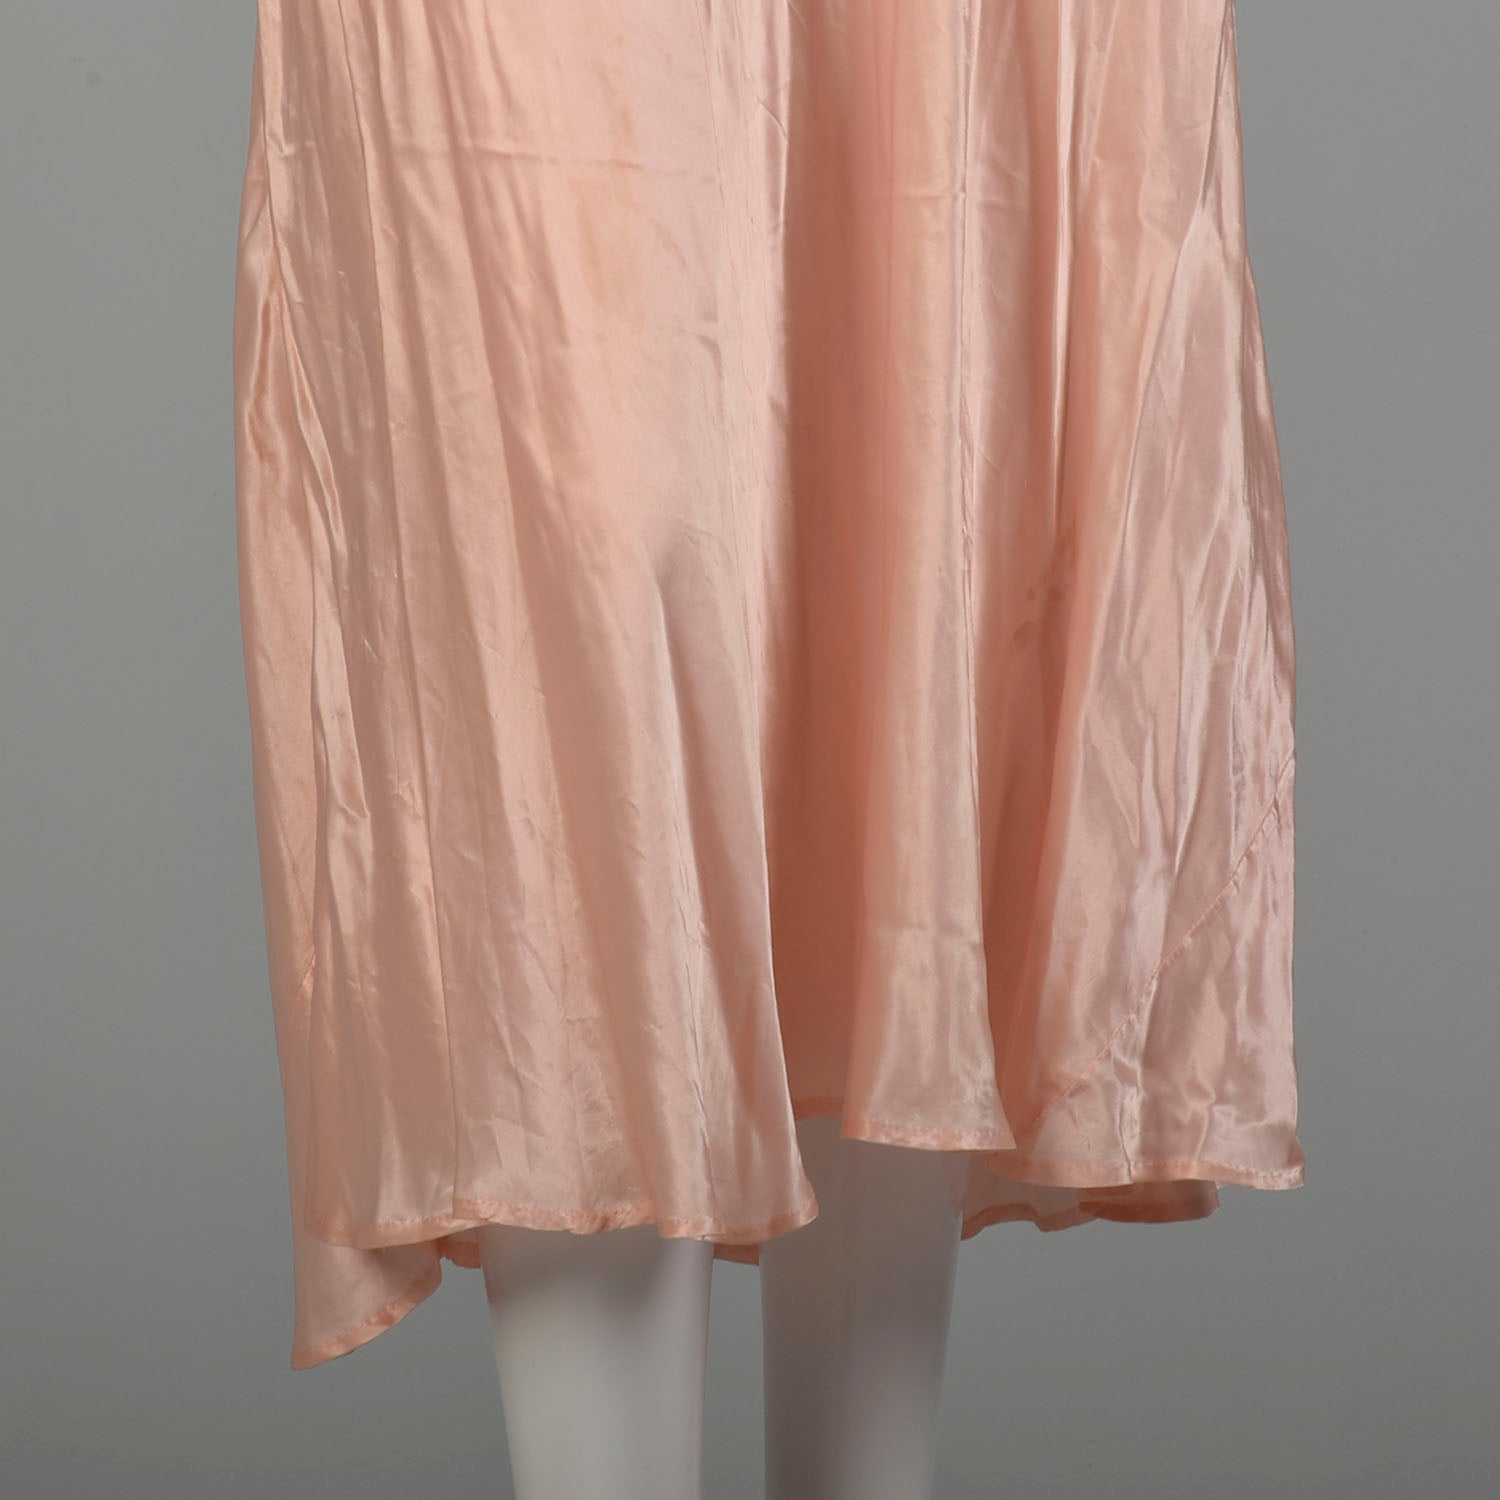 Small 1930s Pink Nightgown Vintage Lingerie Old Hollywood Glamour